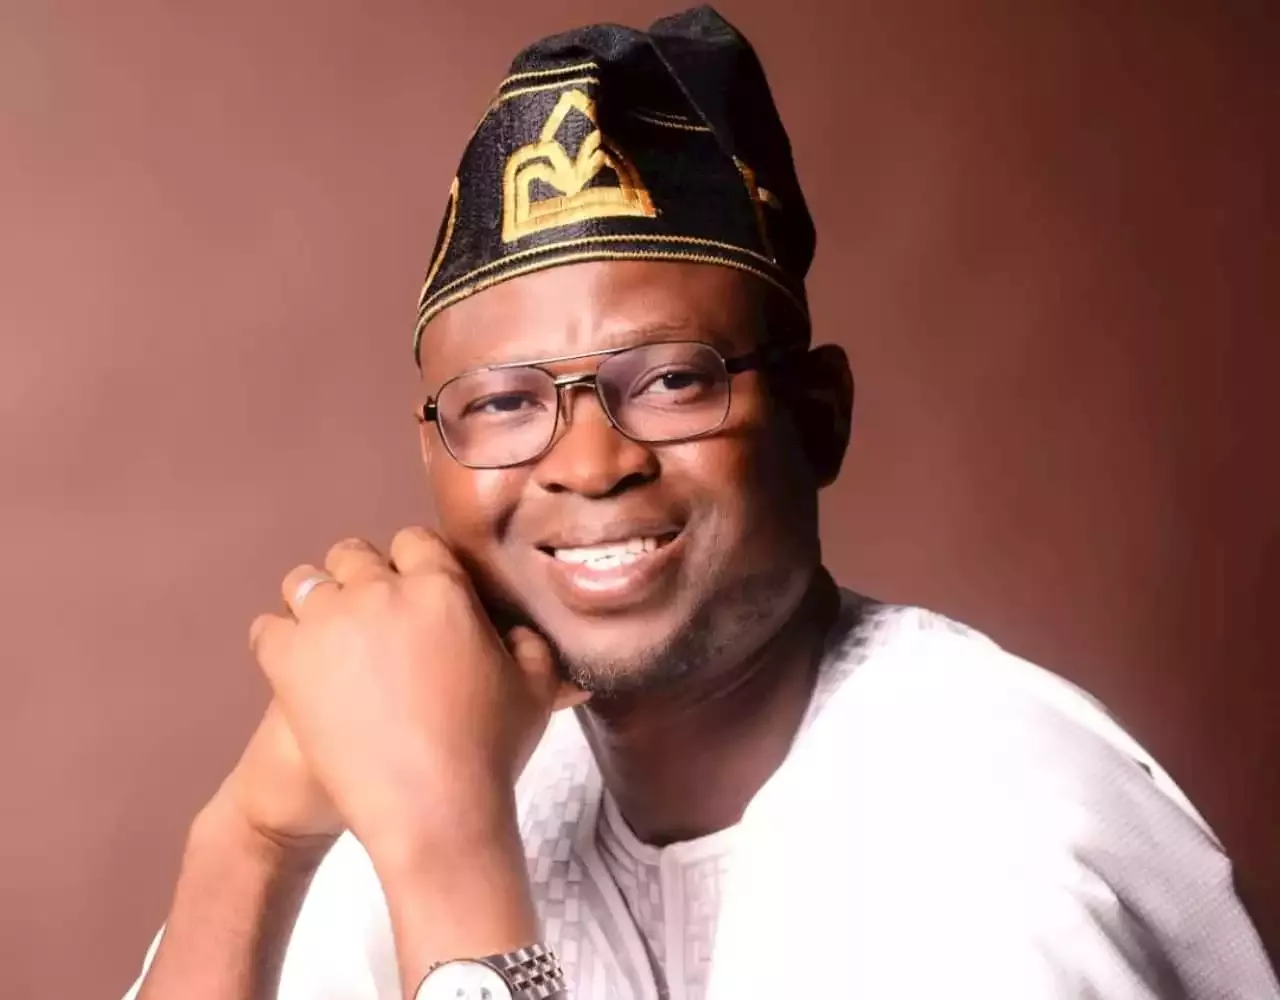 Alao-Akala encouraged me to join APC before he died - Ex-guber candidate, Hakeem Alao